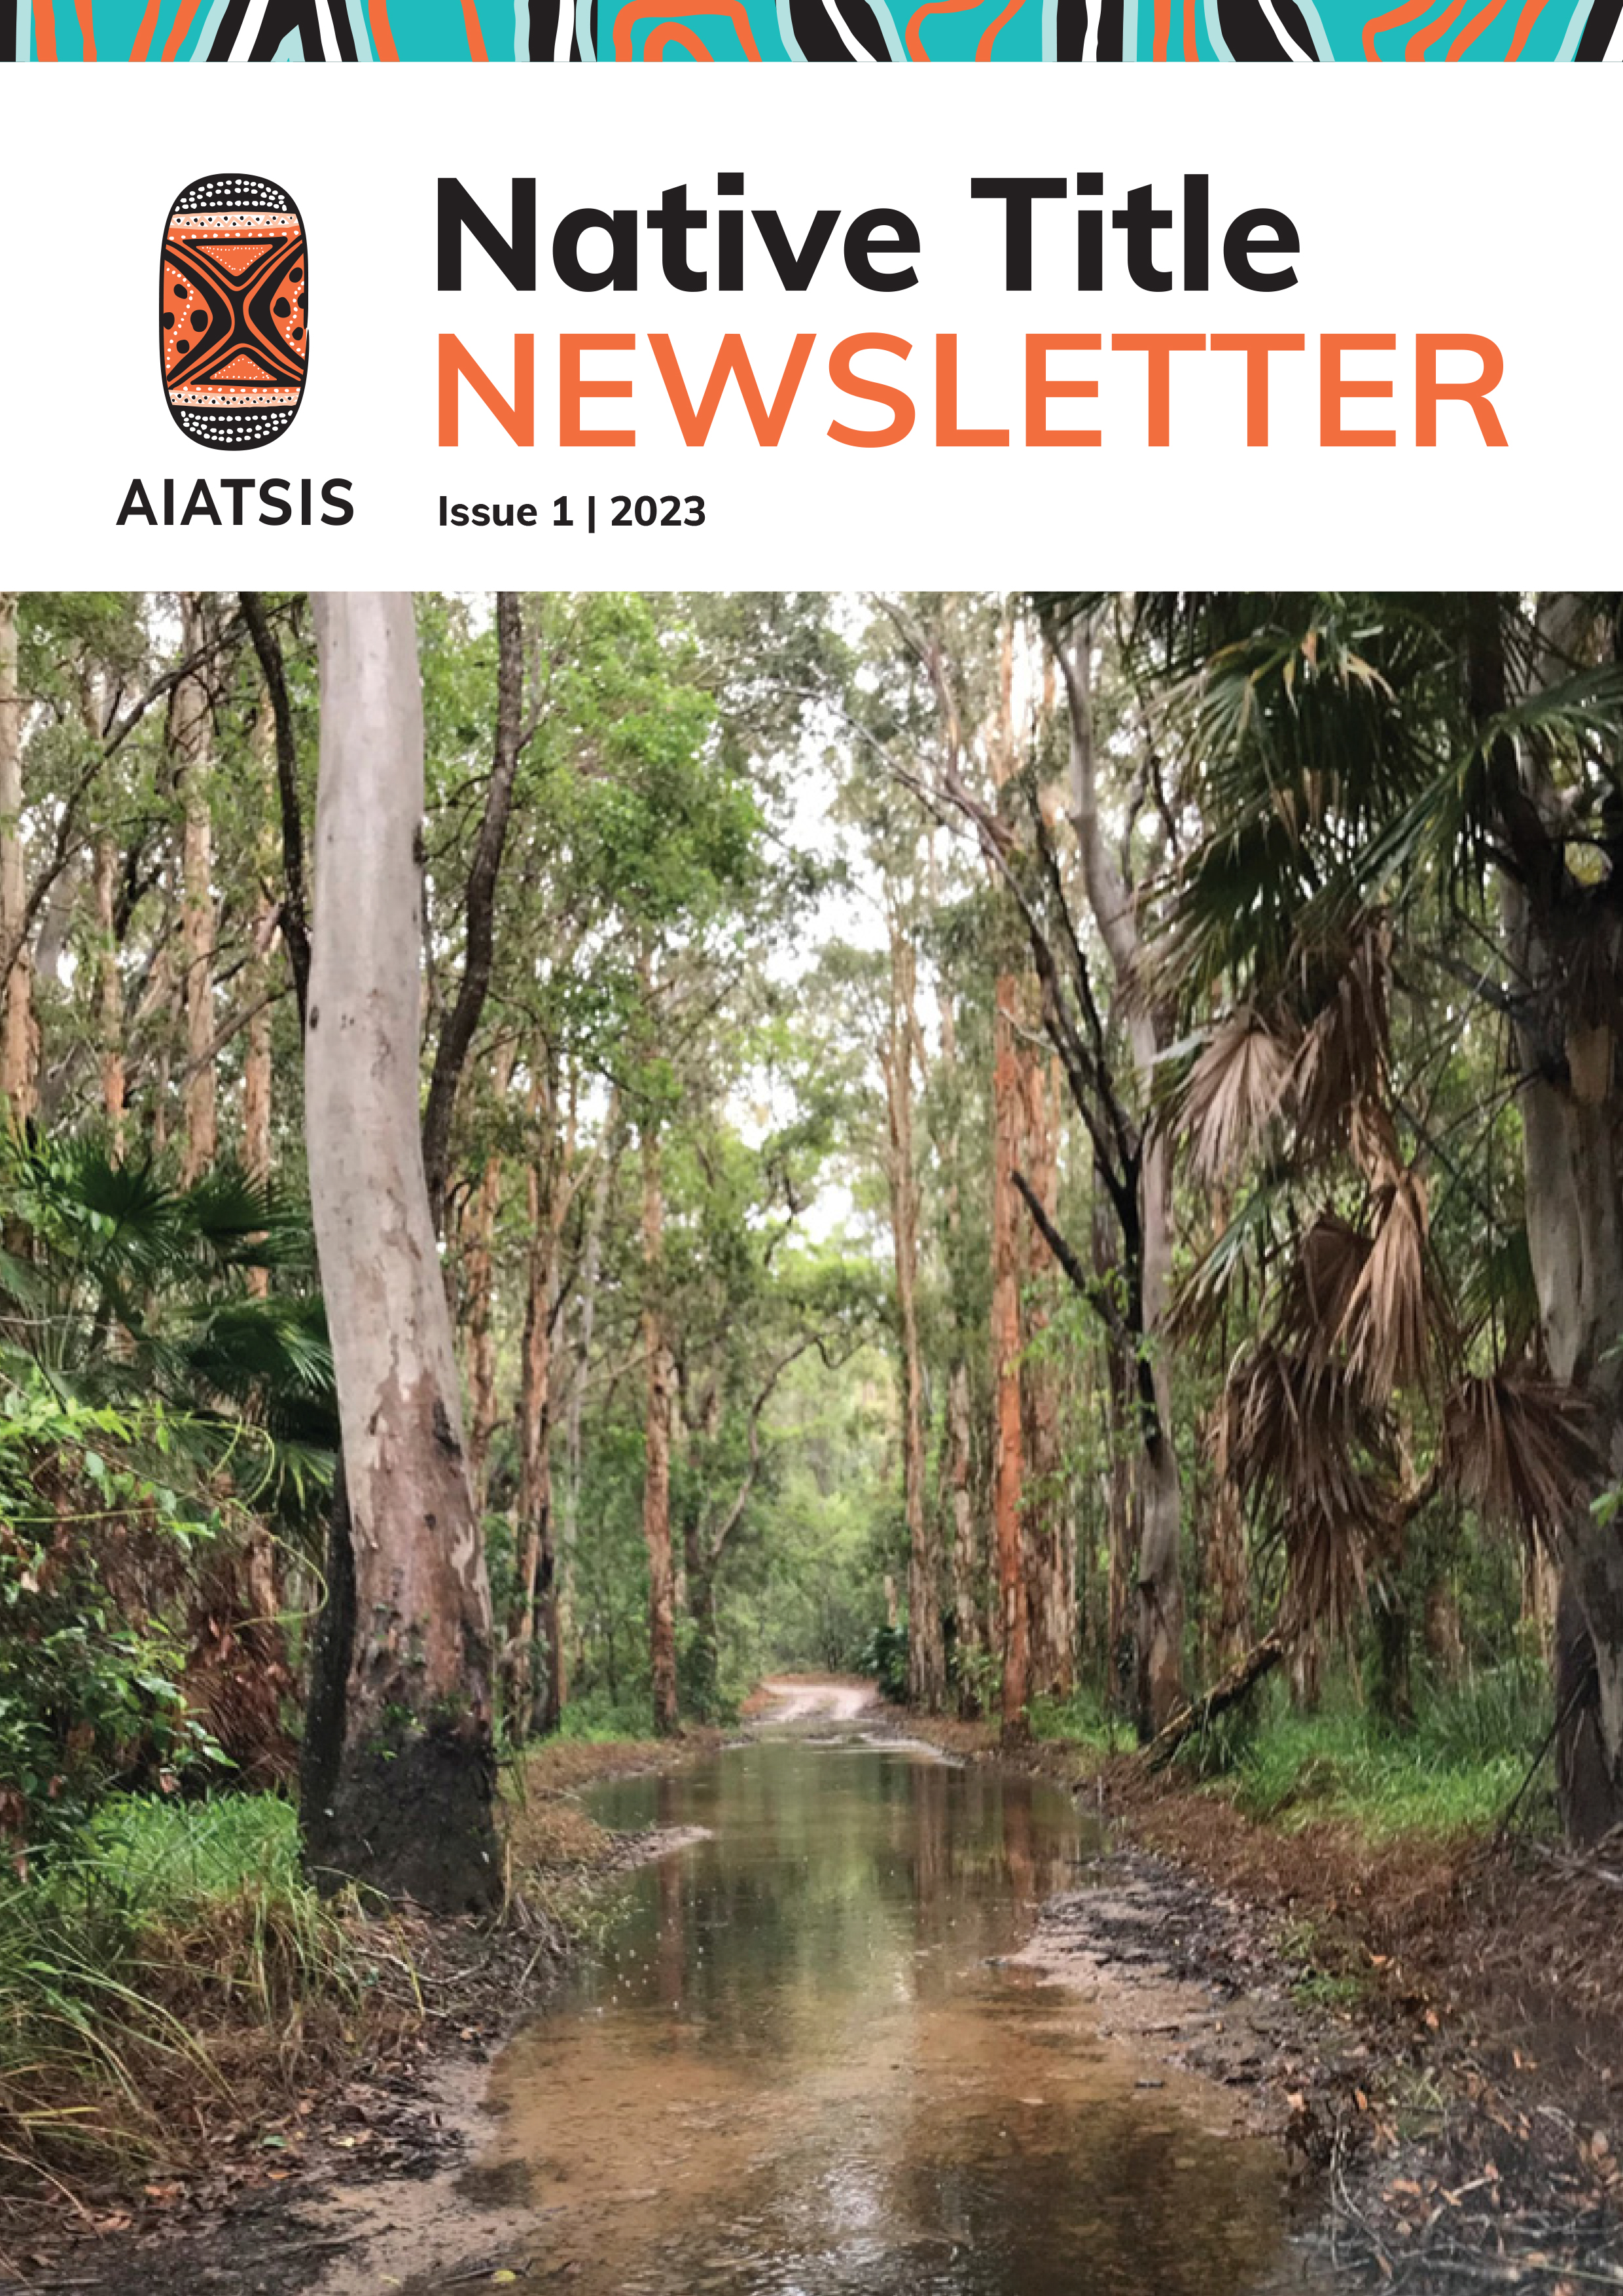 Native Title Newsletter - Issue 1, 2023